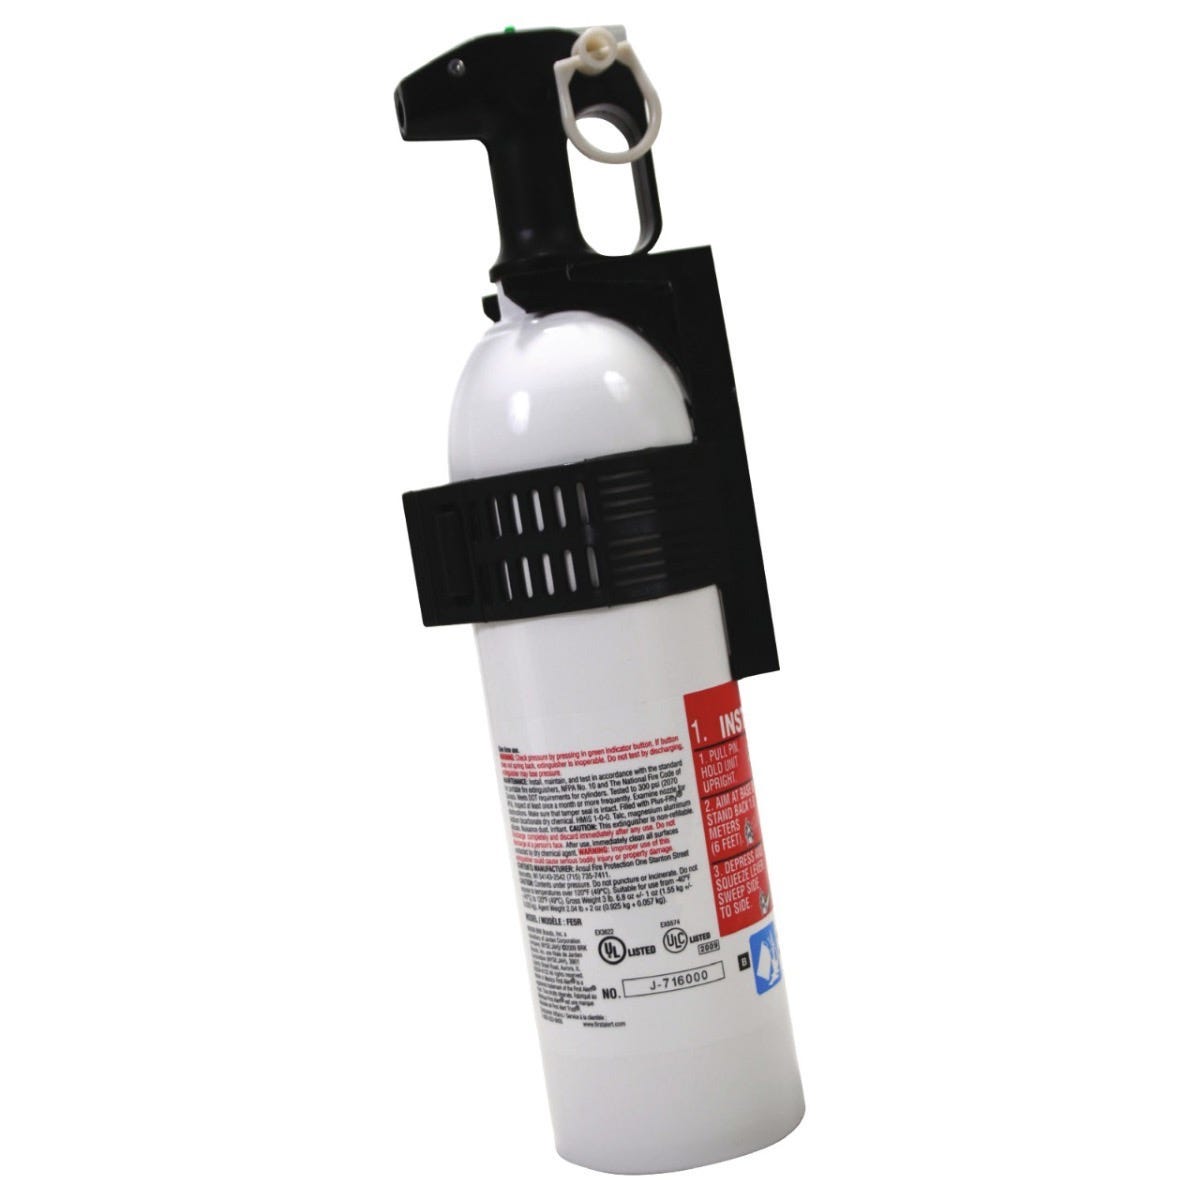 Fire Extinguisher - 295100833 - The Parts Lodge